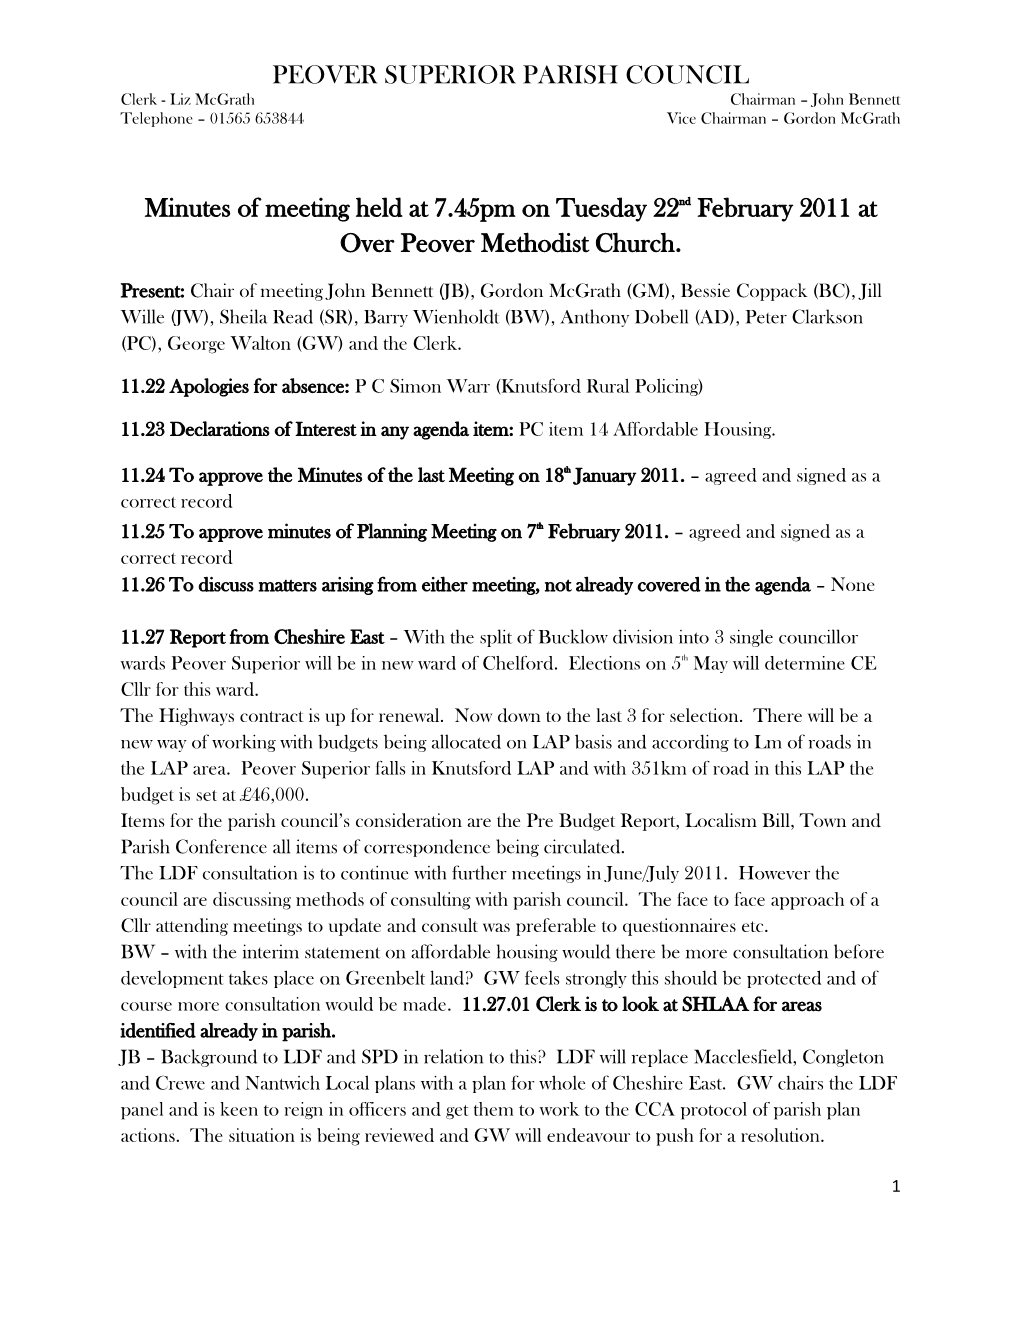 Minutes of Meeting Held at 7.45Pm on Tuesday 22Nd February 2011 at Over Peover Methodist Church